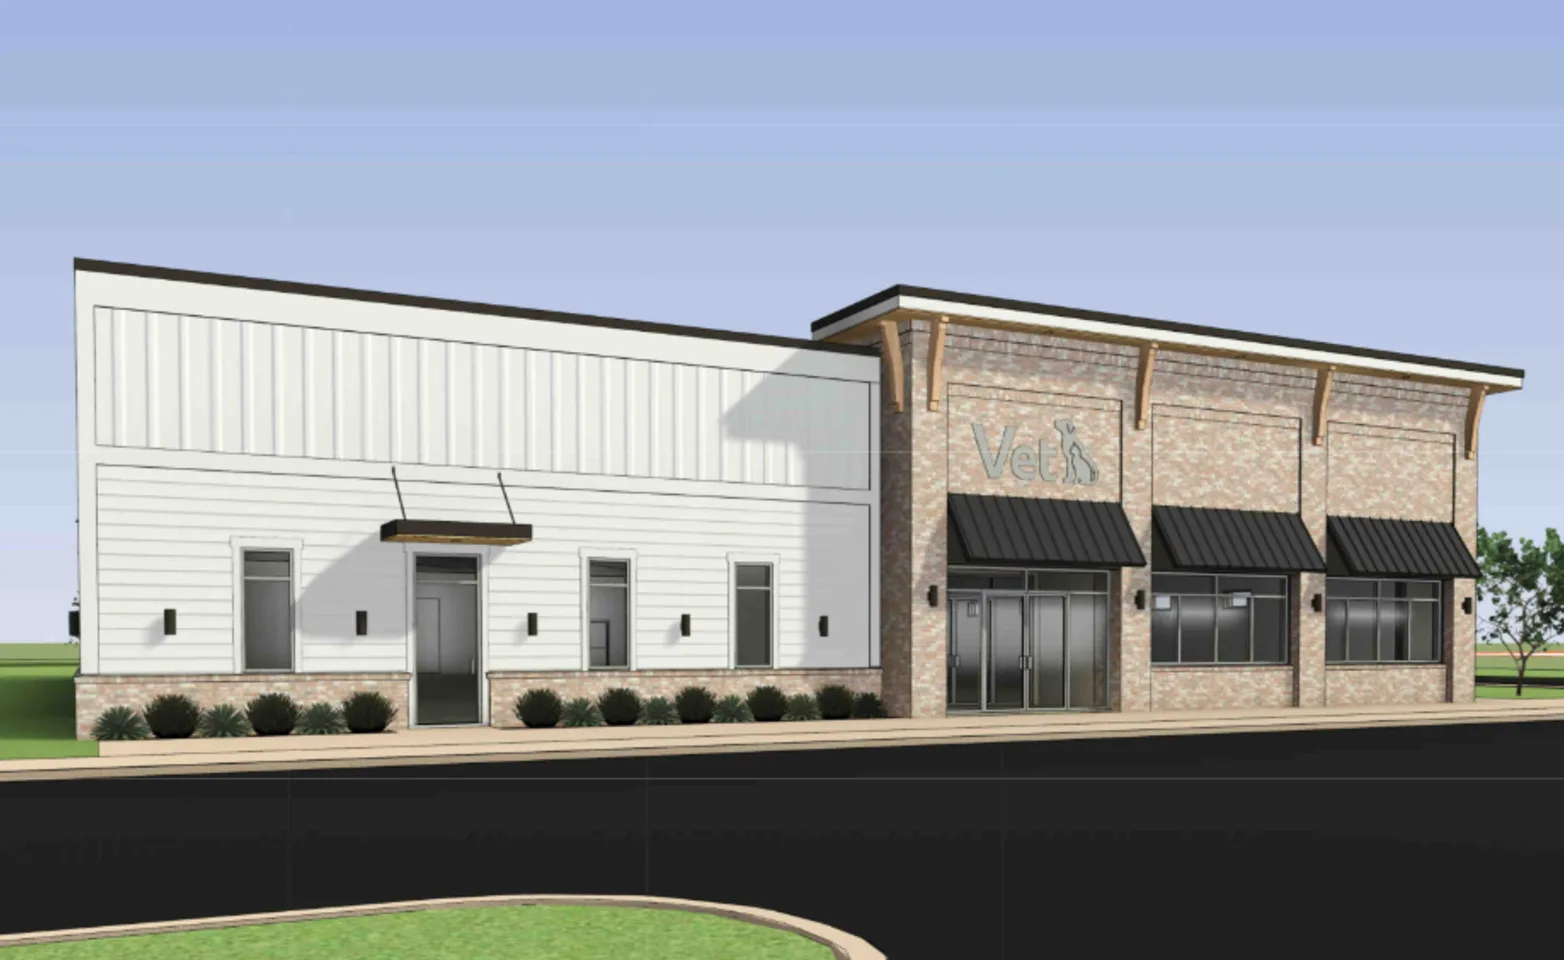 A rendering of the front of the new location of Animal Emergency & Critical Care